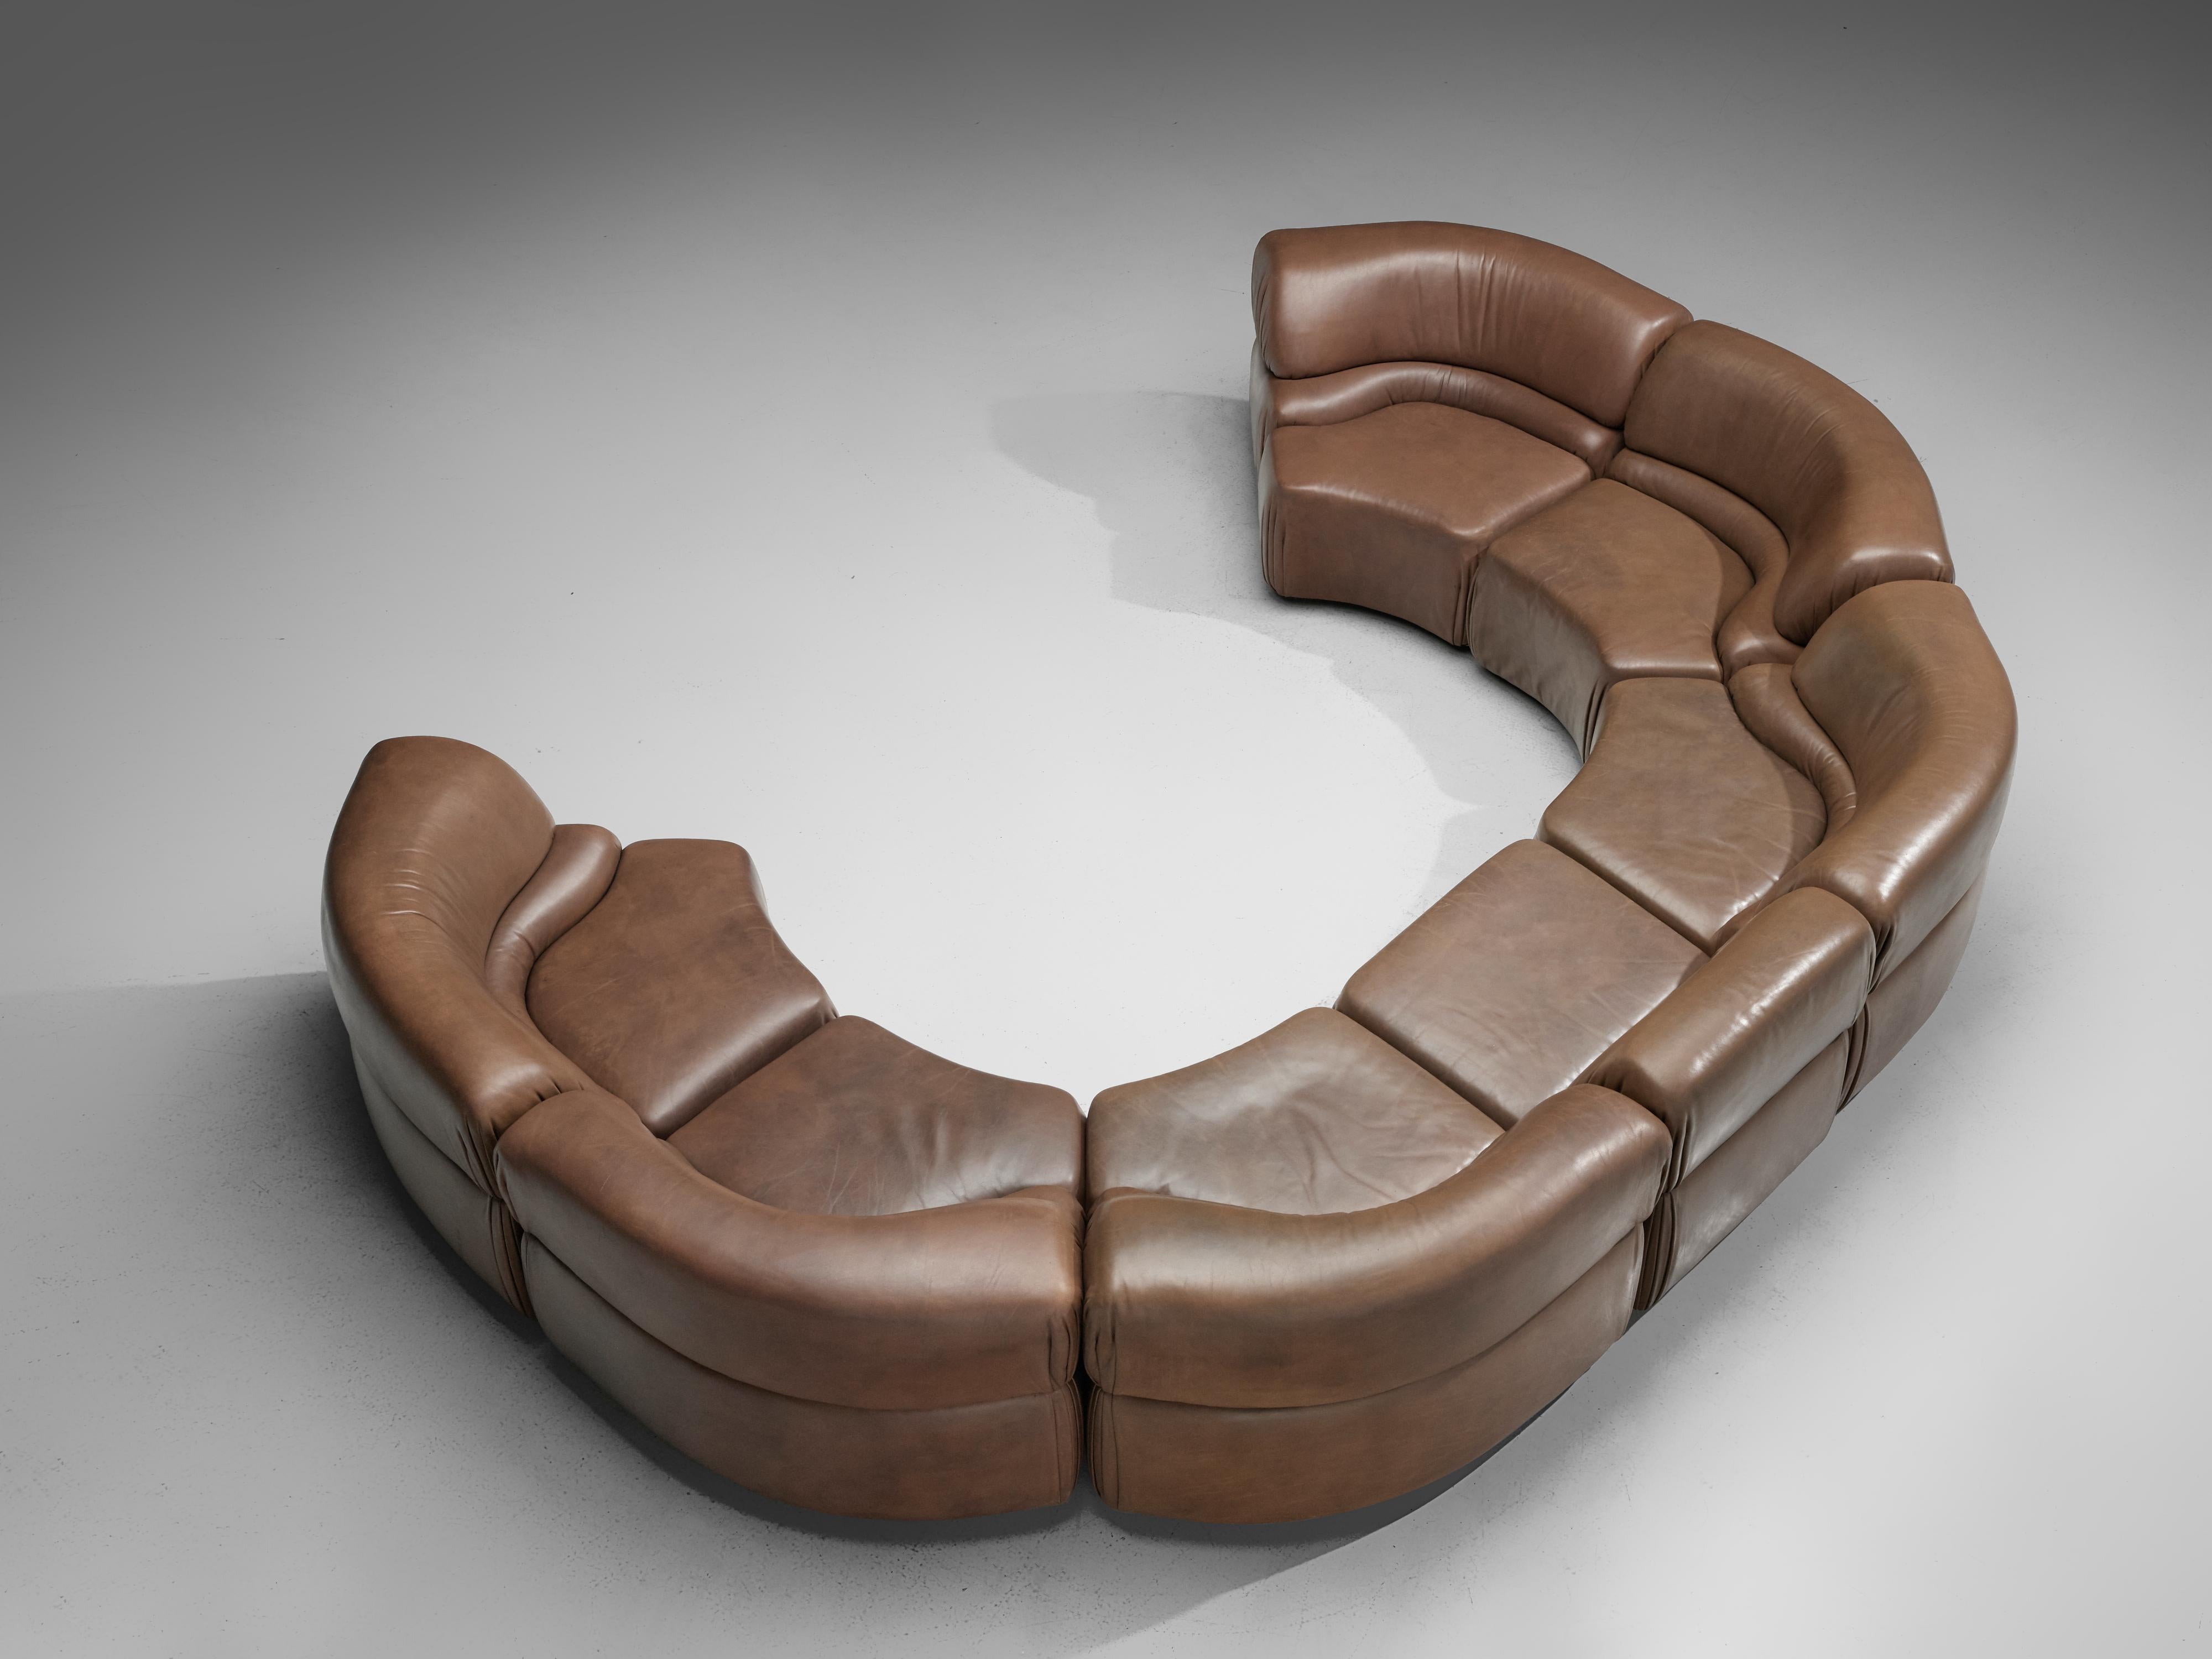 De Sede, 'Cosmos' sectional sofa in seven elements, patinated brown leather, Switzerland, 1970s

High-quality modular sofa made by De Sede in Switzerland in the 1970s. Due to the rounded, separated elements the sofa can be used in a variety of